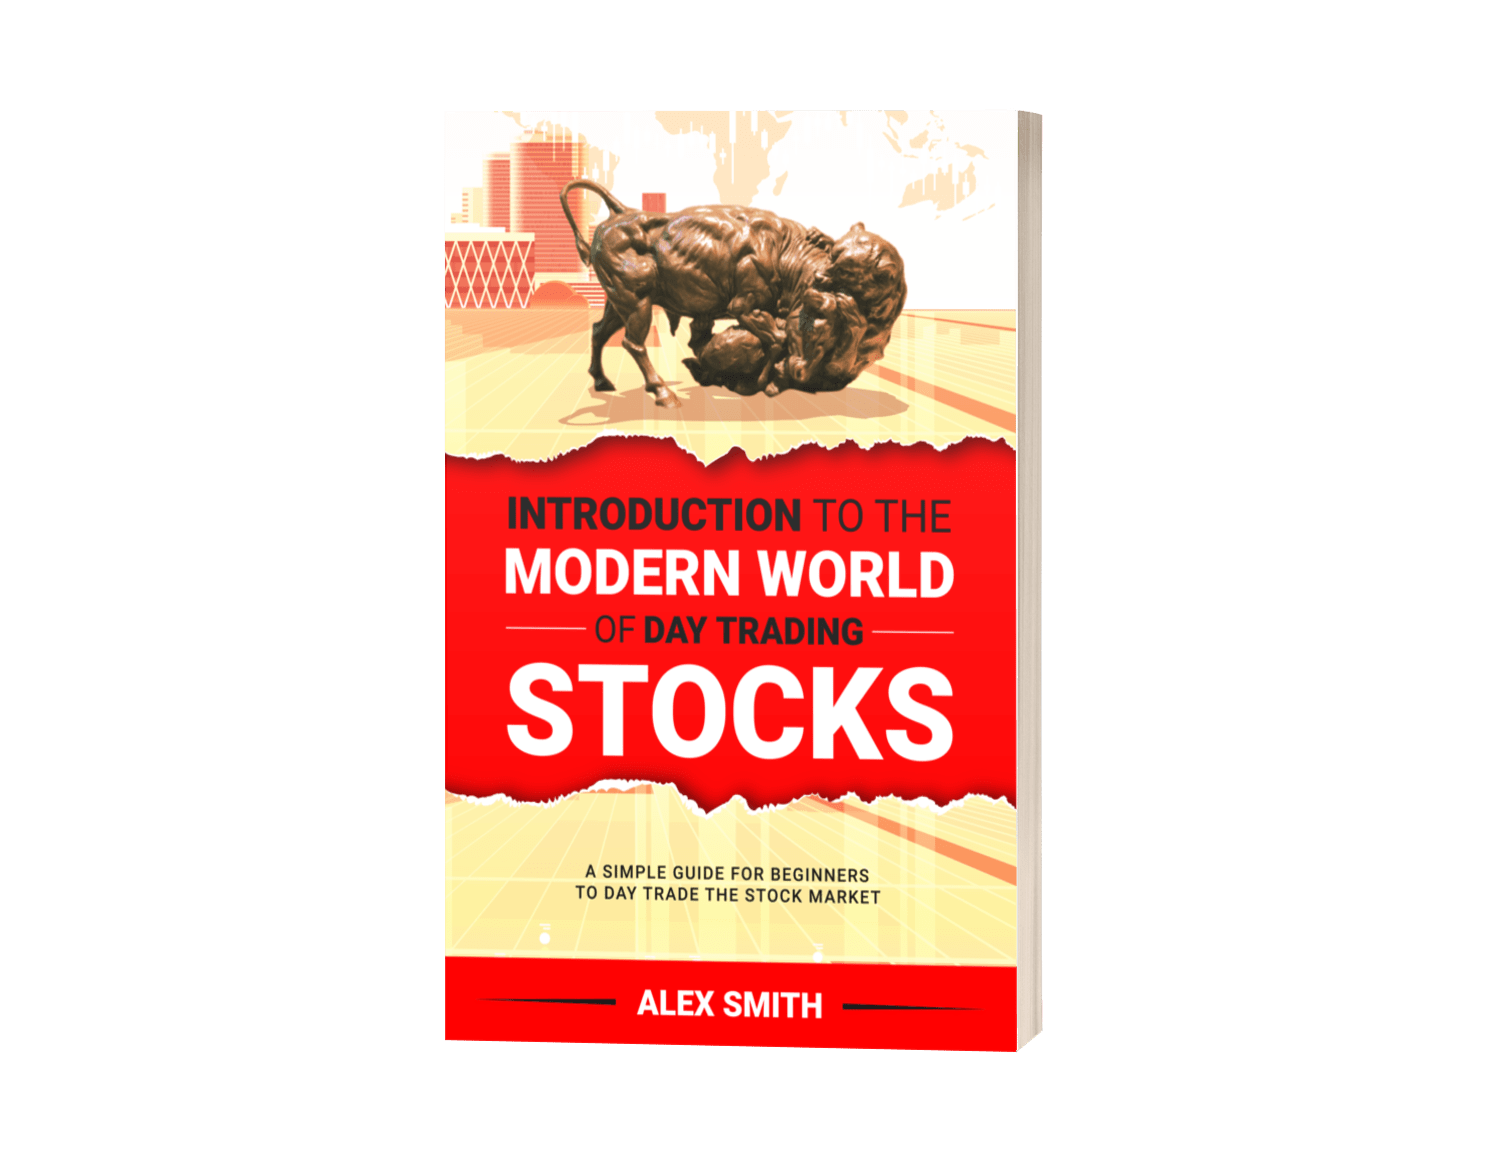 Introduction to the modern world of day trading stocks